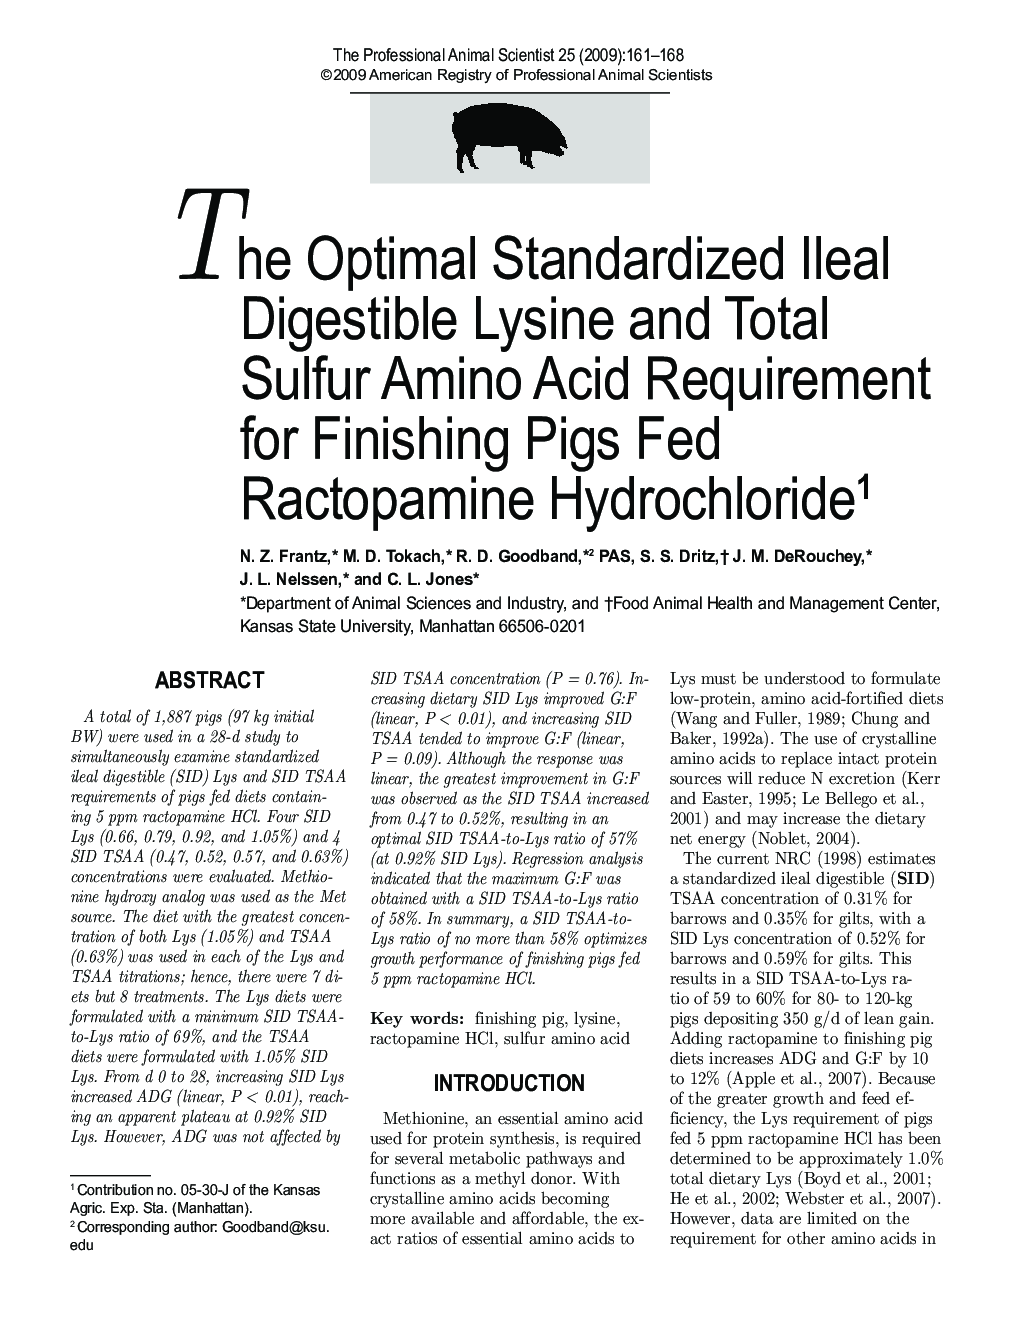 The Optimal Standardized Ileal Digestible Lysine and Total Sulfur Amino Acid Requirement for Finishing Pigs Fed Ractopamine Hydrochloride1